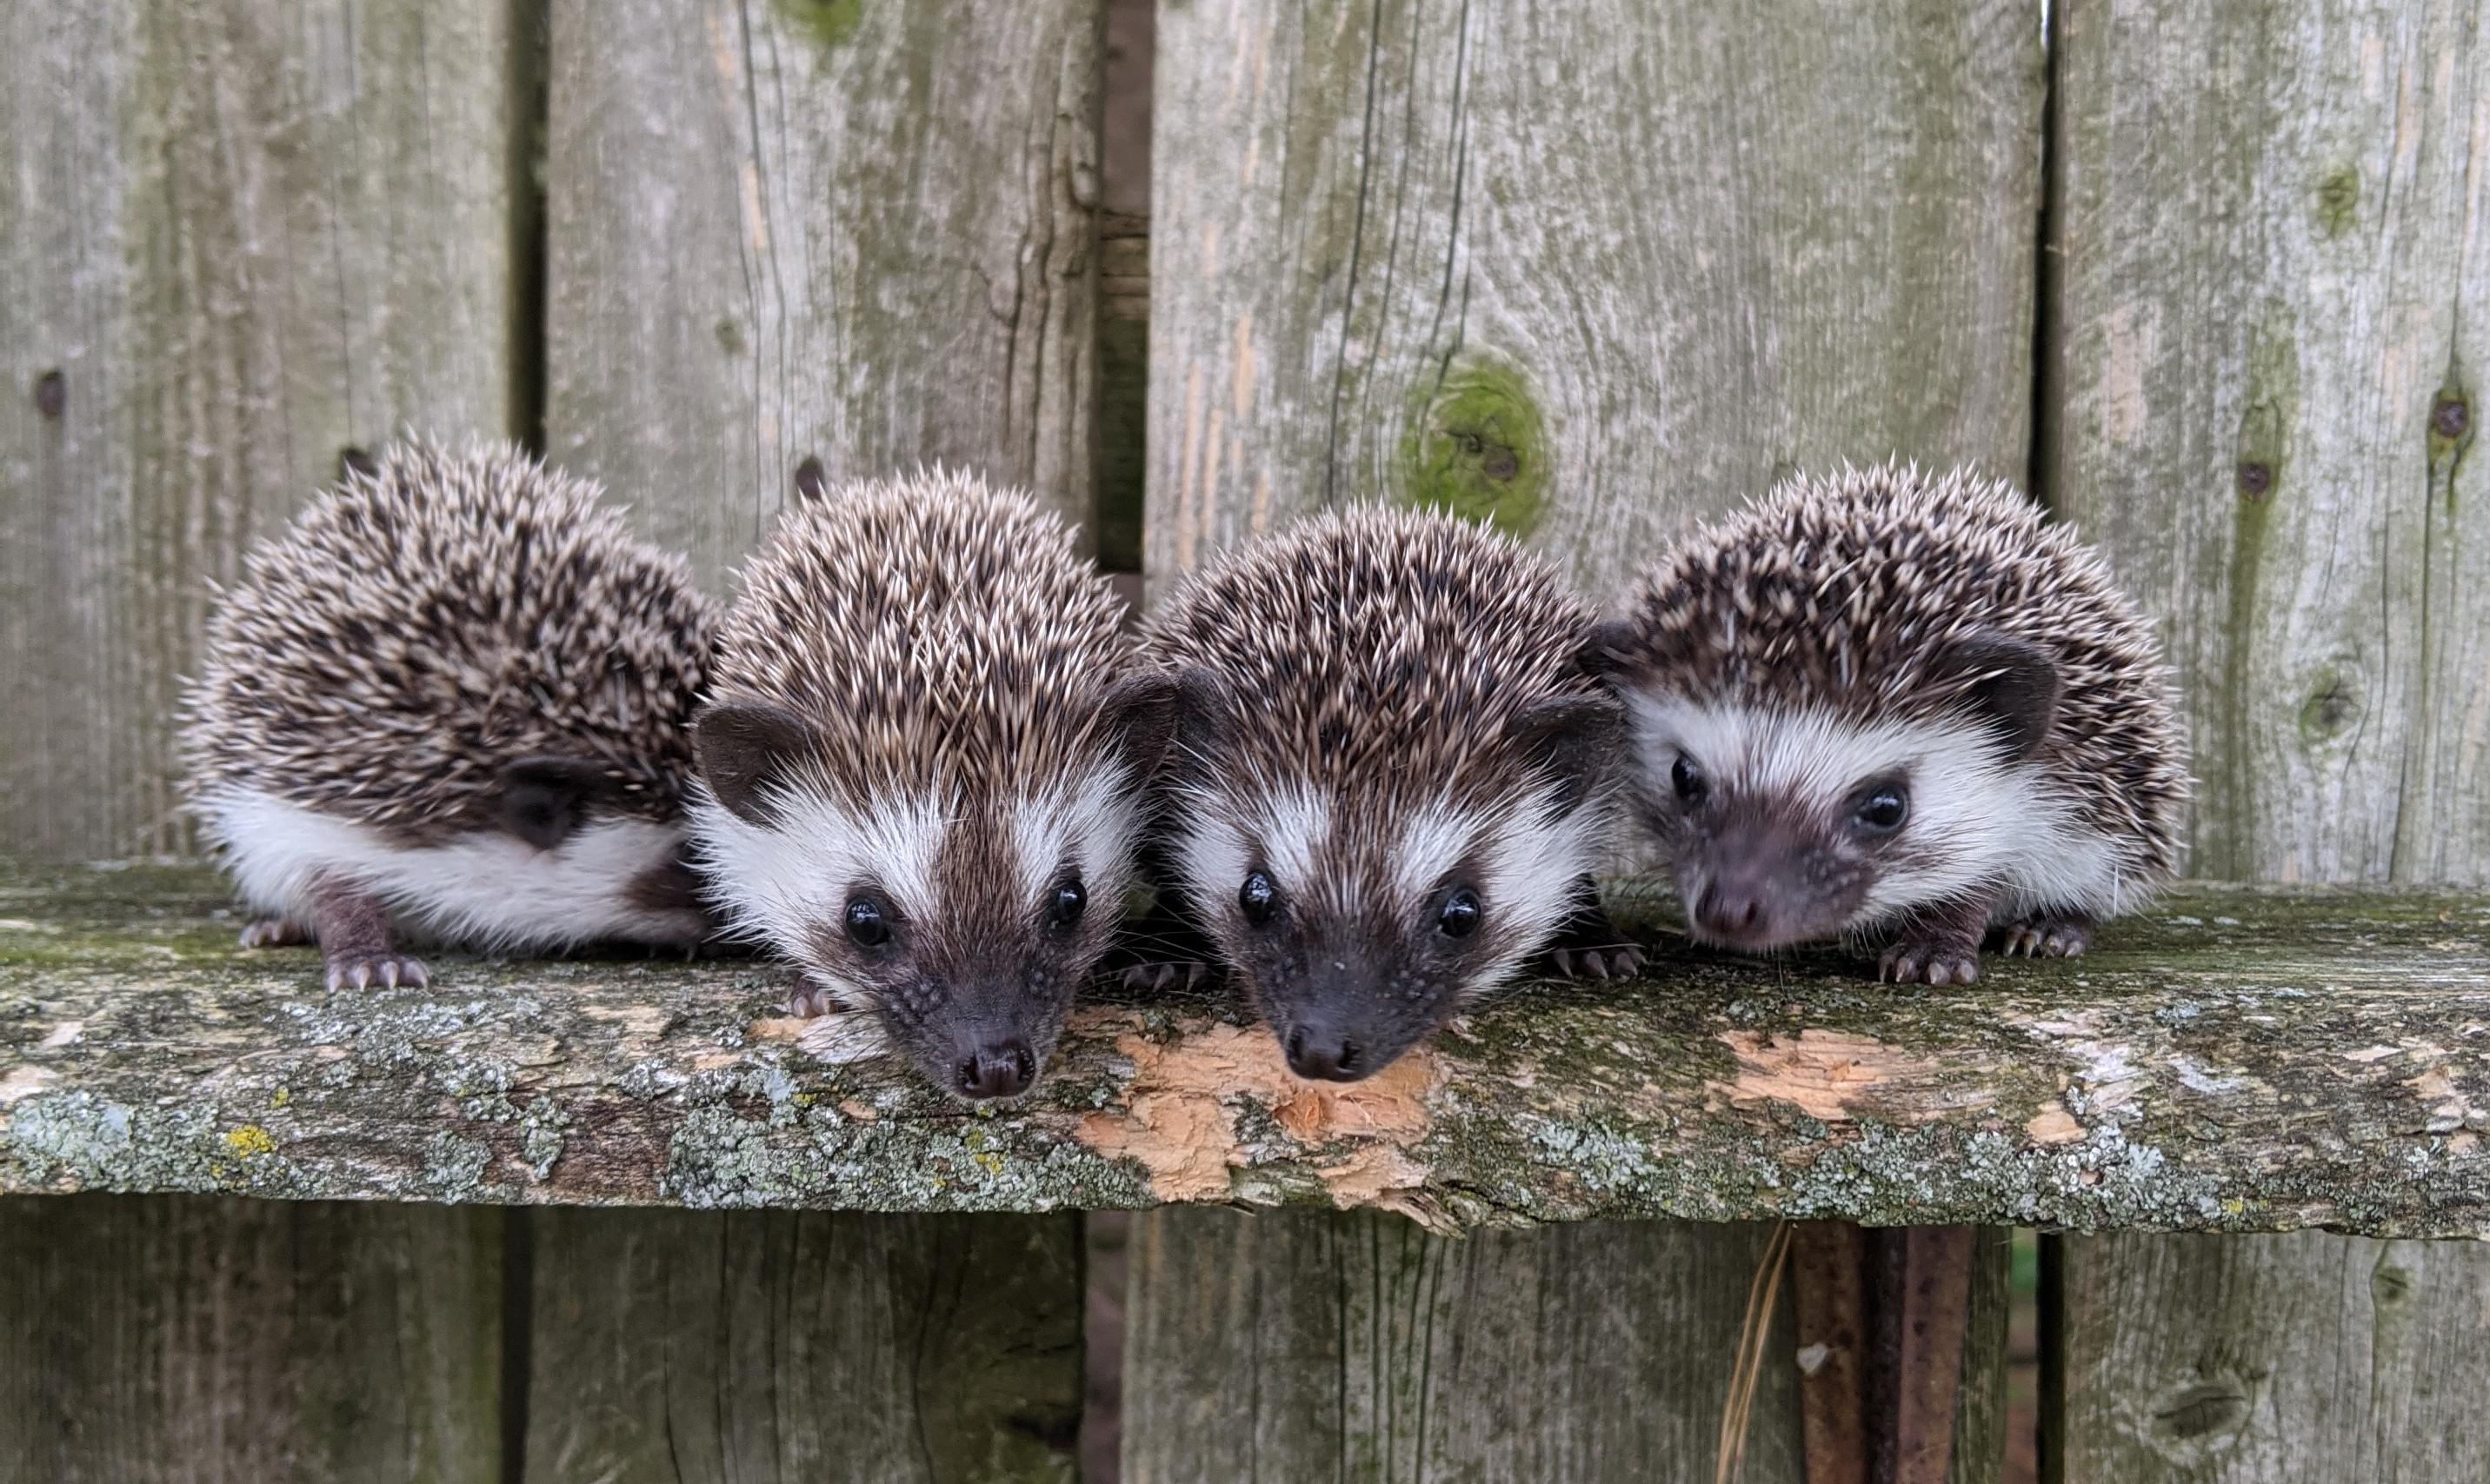 Is a group of hedgehogs called a prickle?